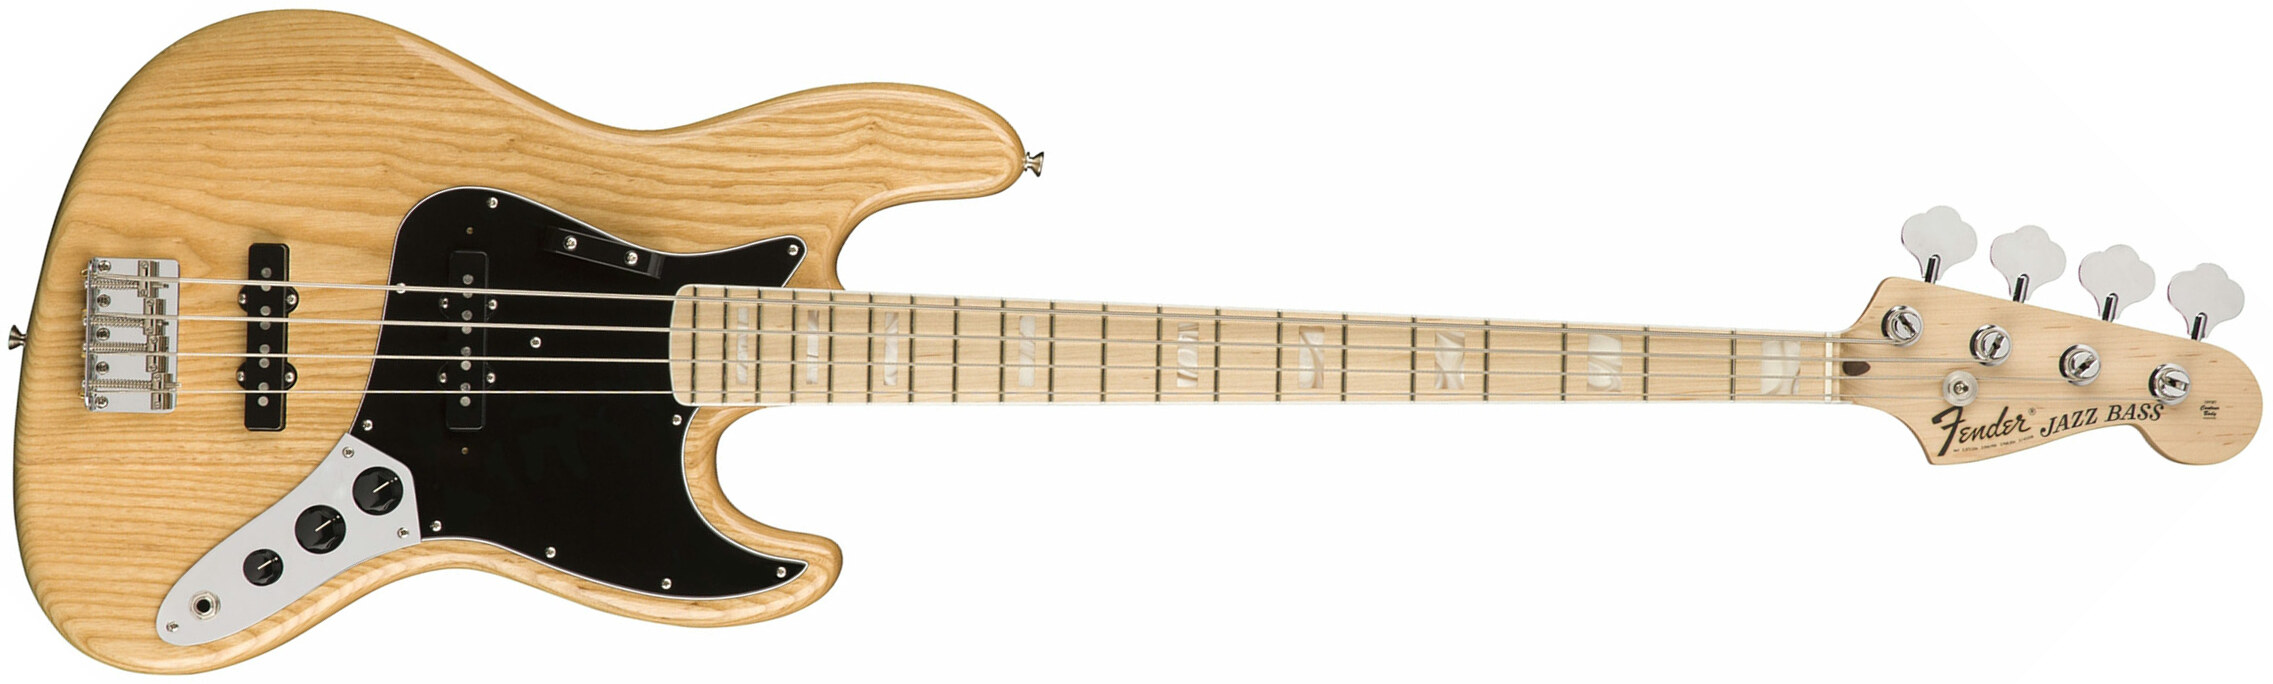 Fender Jazz Bass '70s American Original Usa Mn - Natural - Basse Électrique Solid Body - Main picture